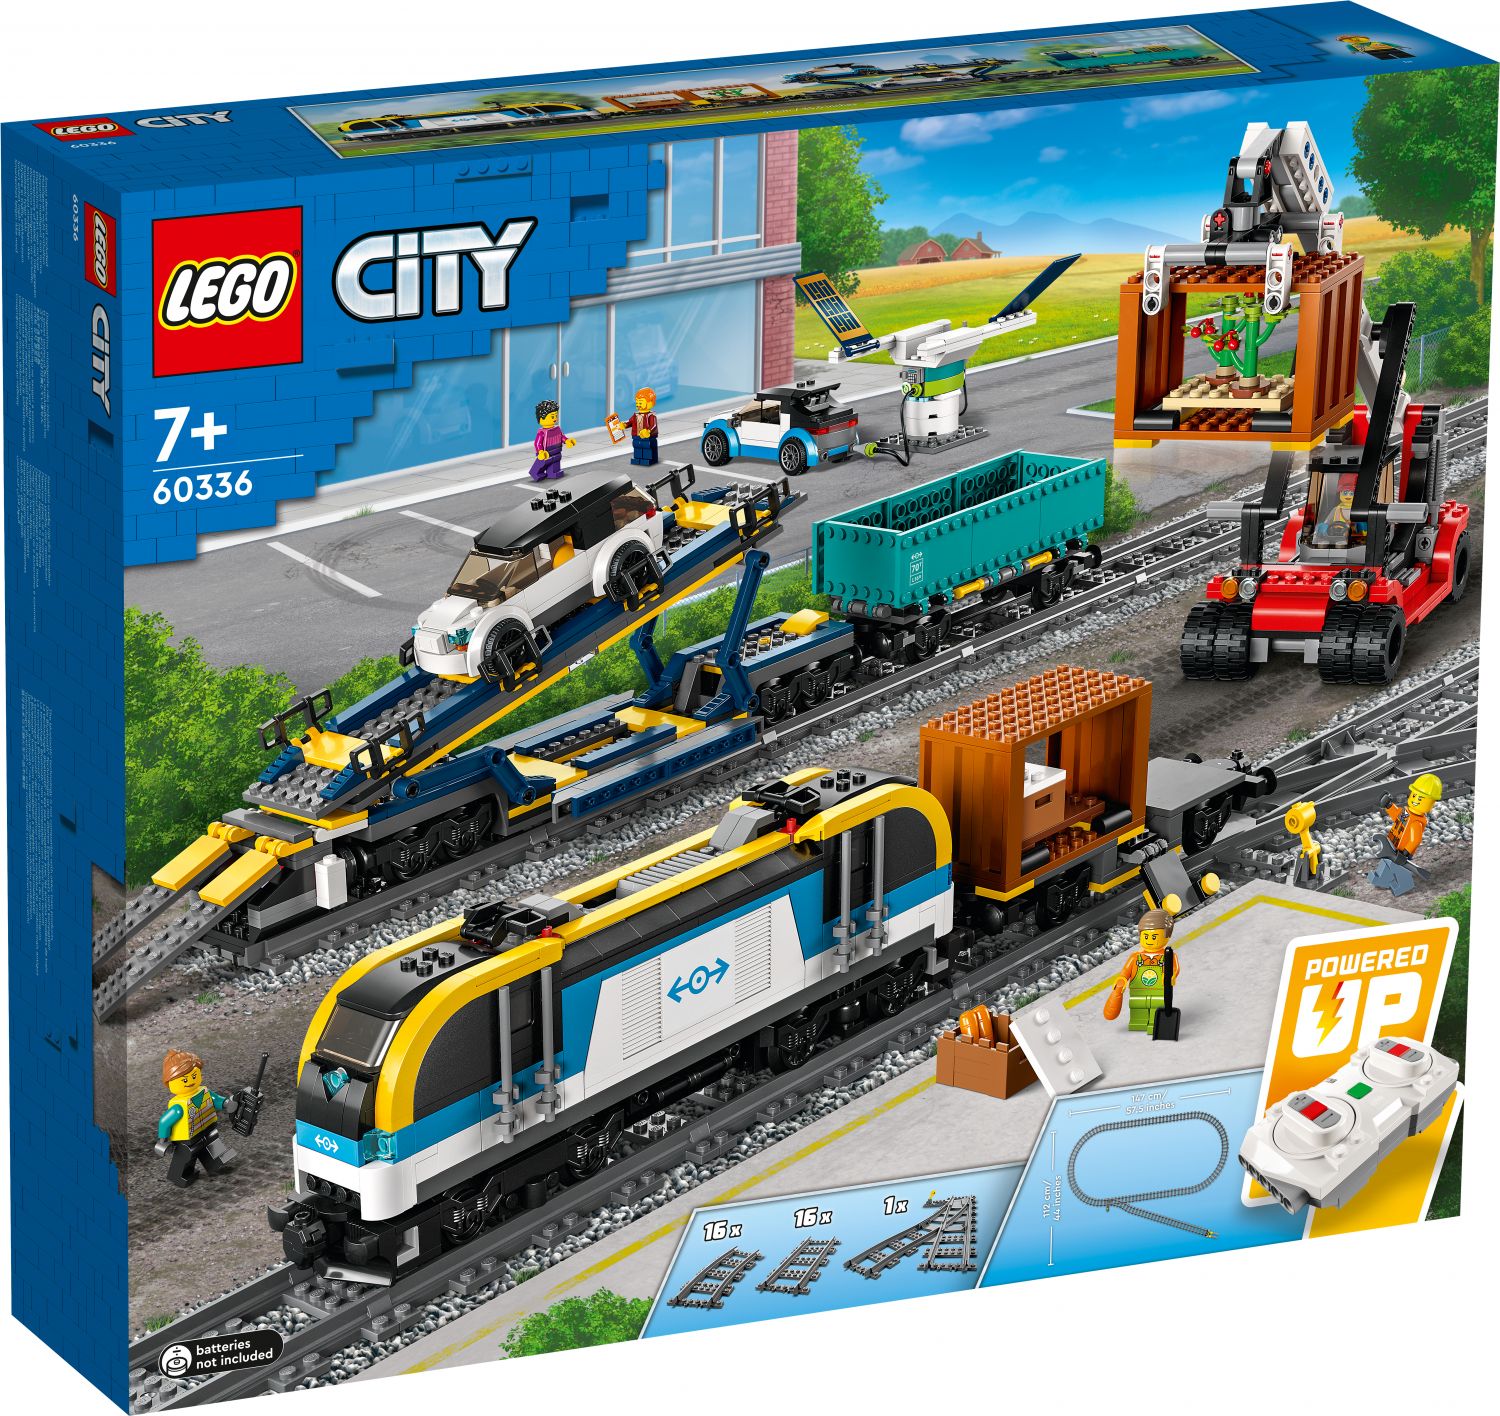 Better Images of LEGO City Freight Train (60336)